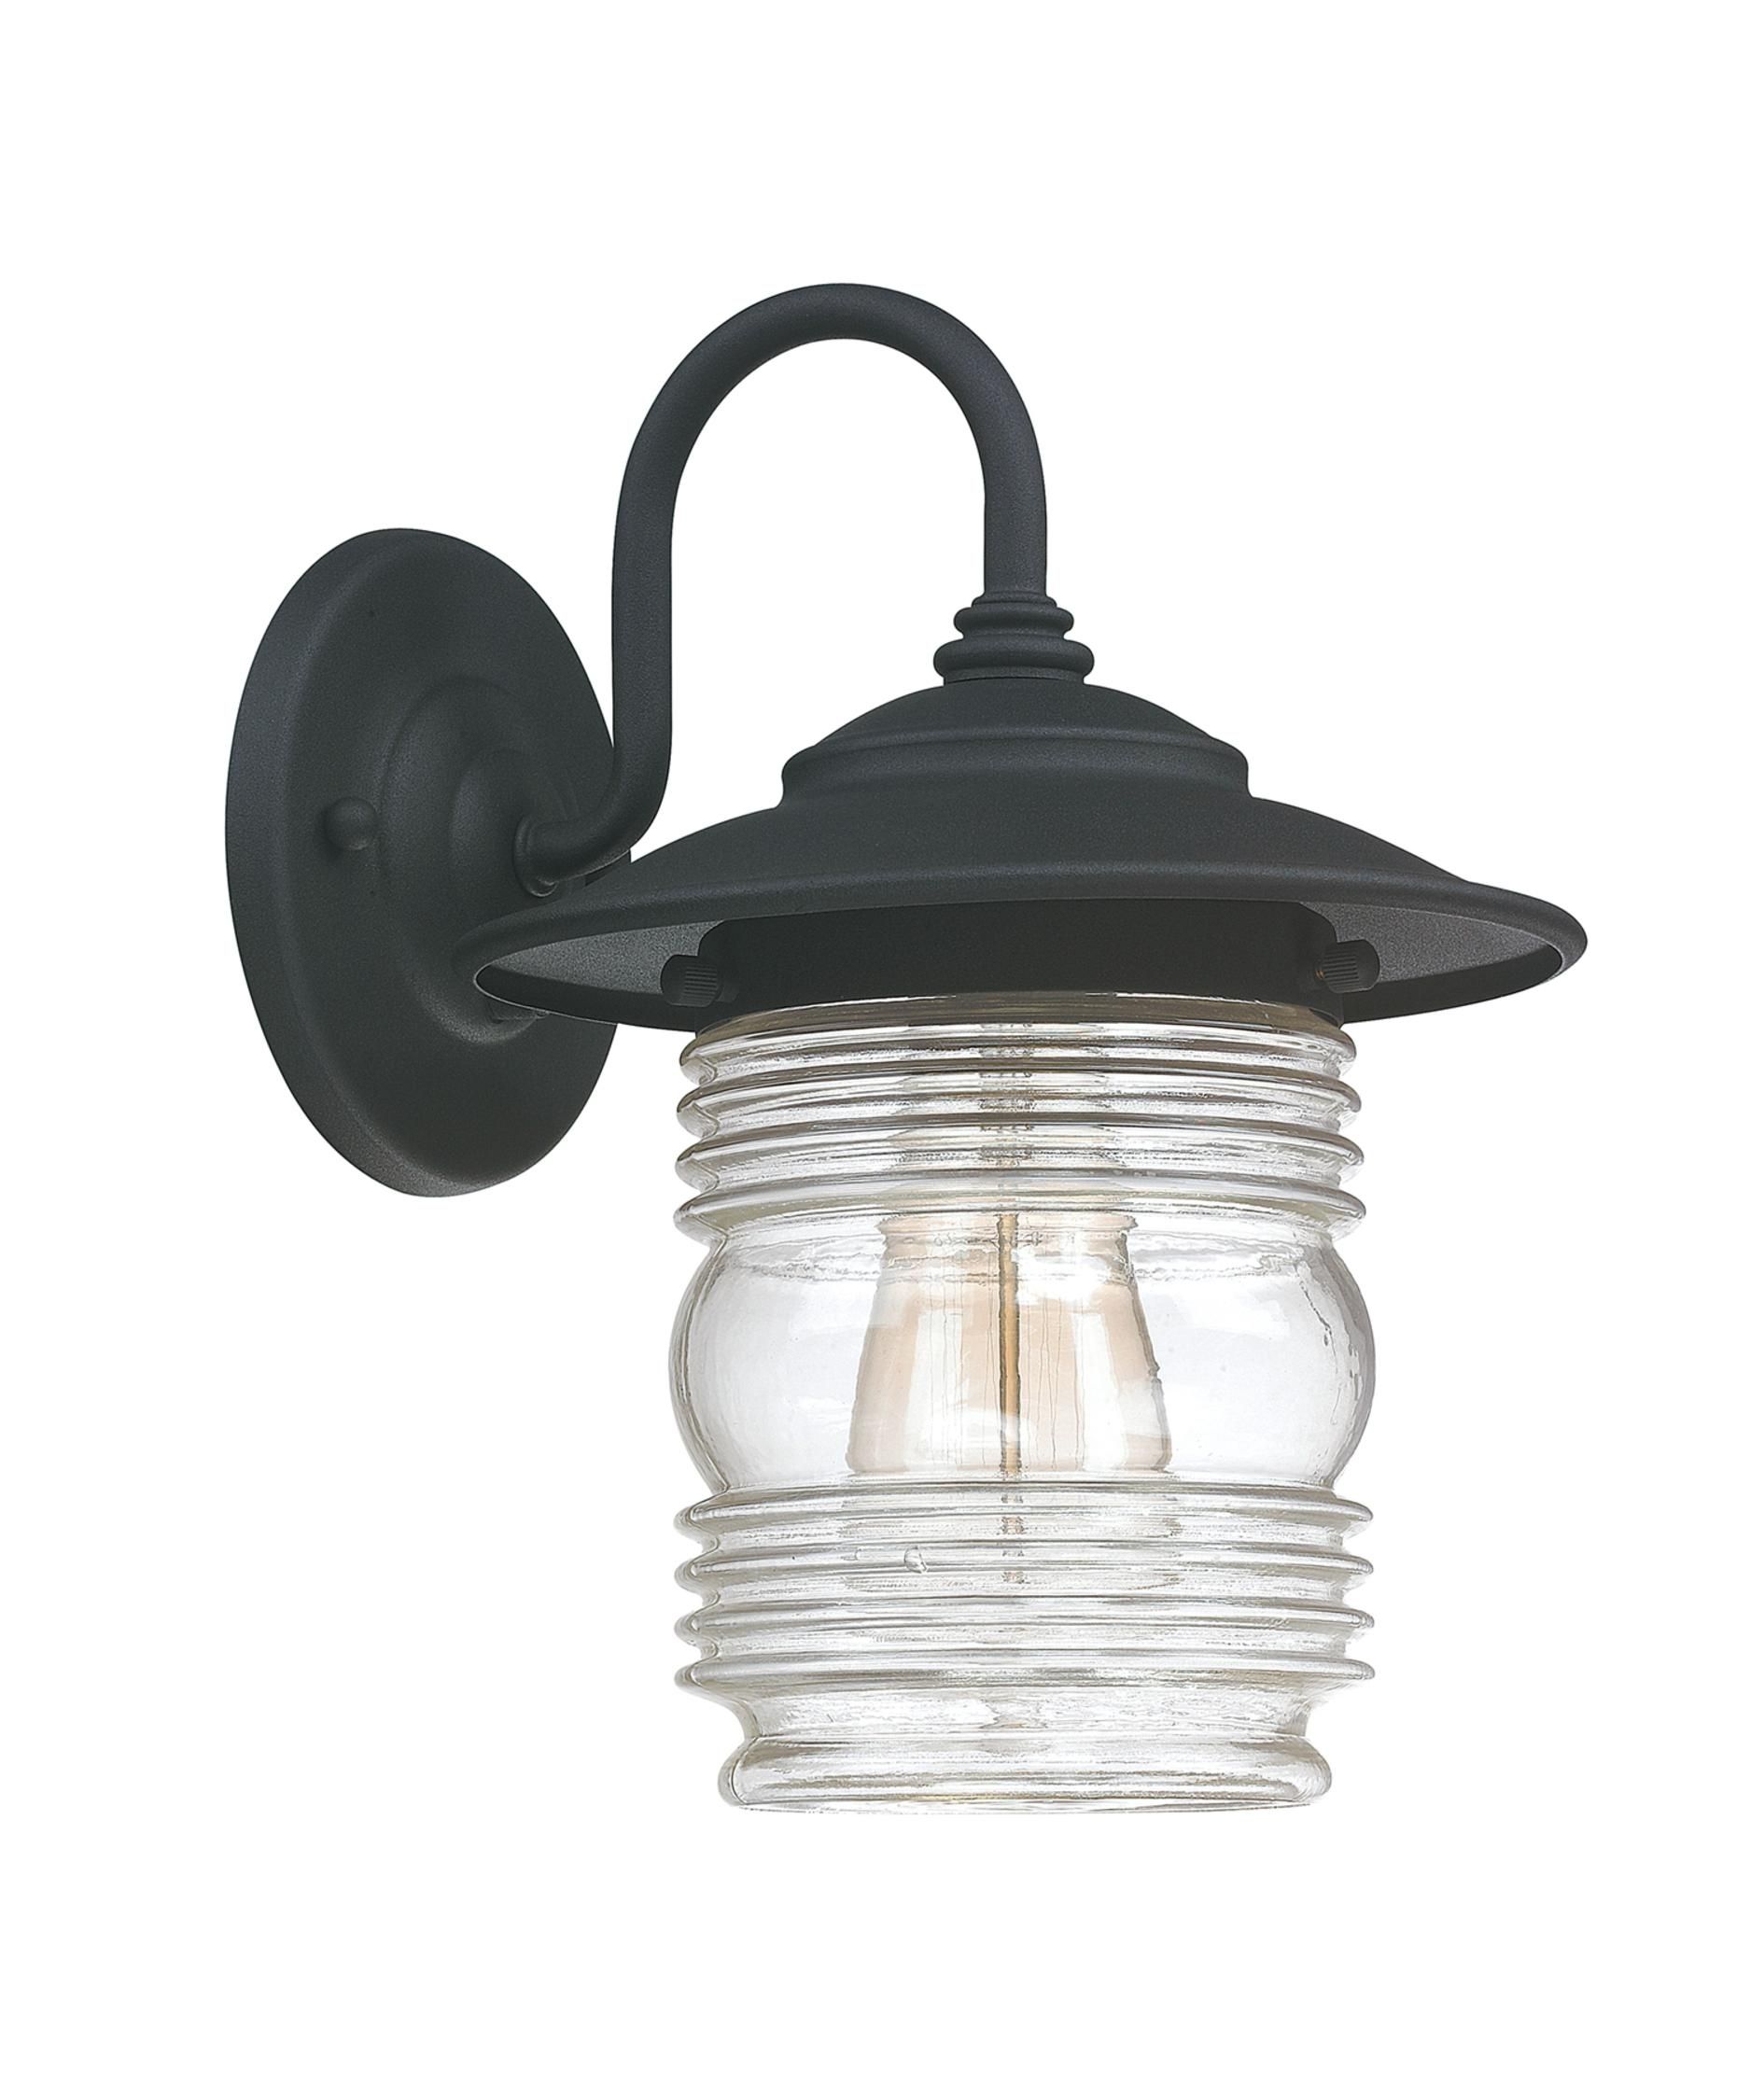 Capital Lighting 9671 Creekside 8 Inch Wide 1 Light Outdoor Wall Pertaining To Antique Outdoor Wall Lighting (View 13 of 15)